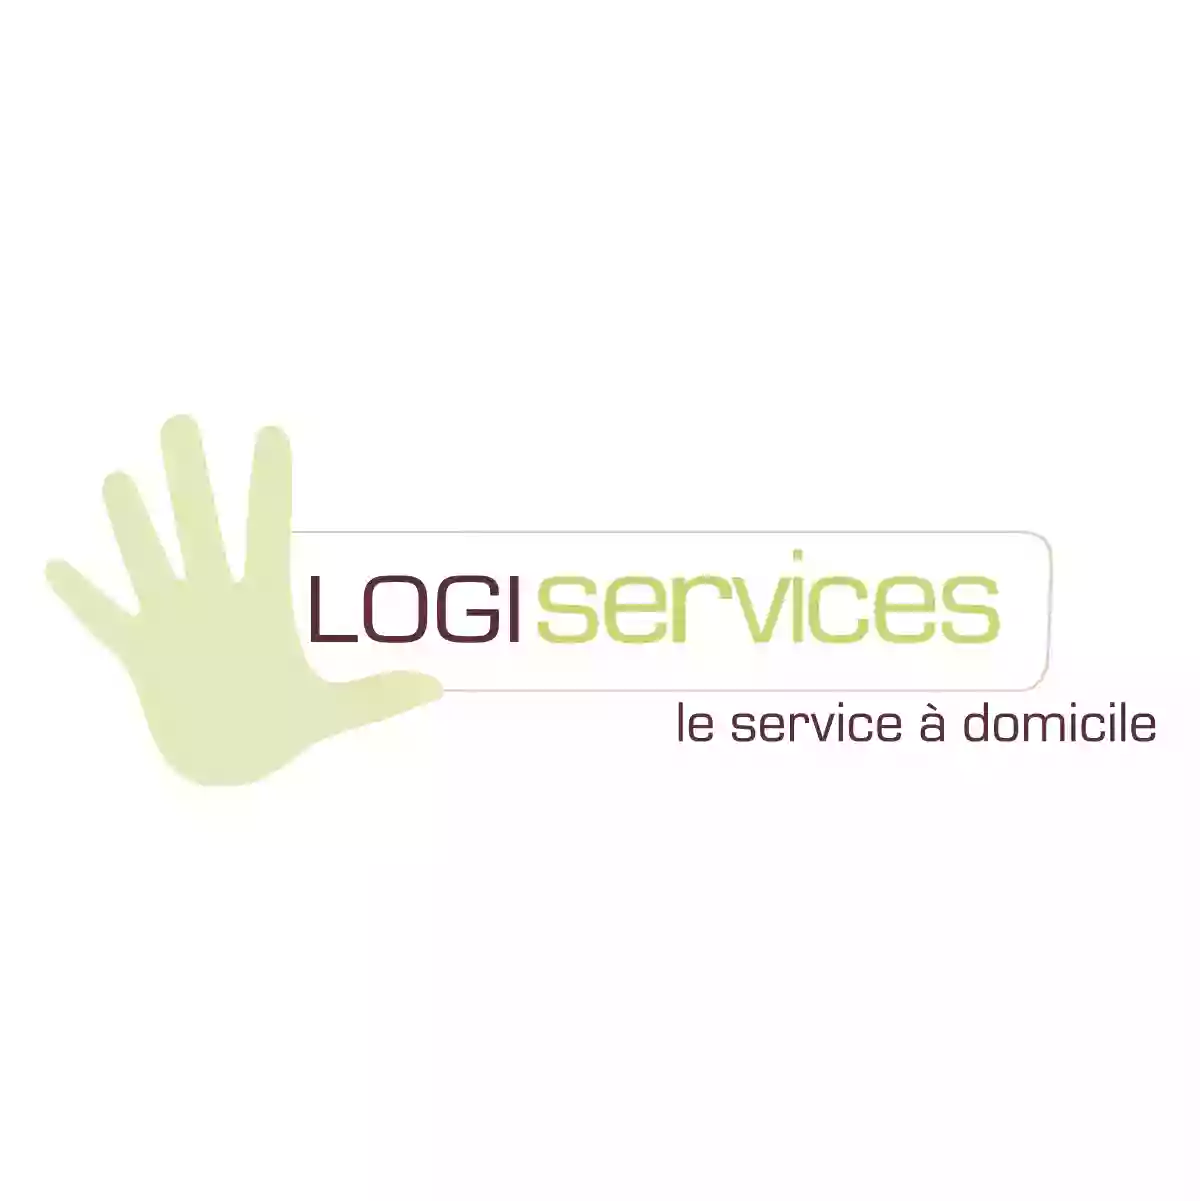 LOGISERVICES